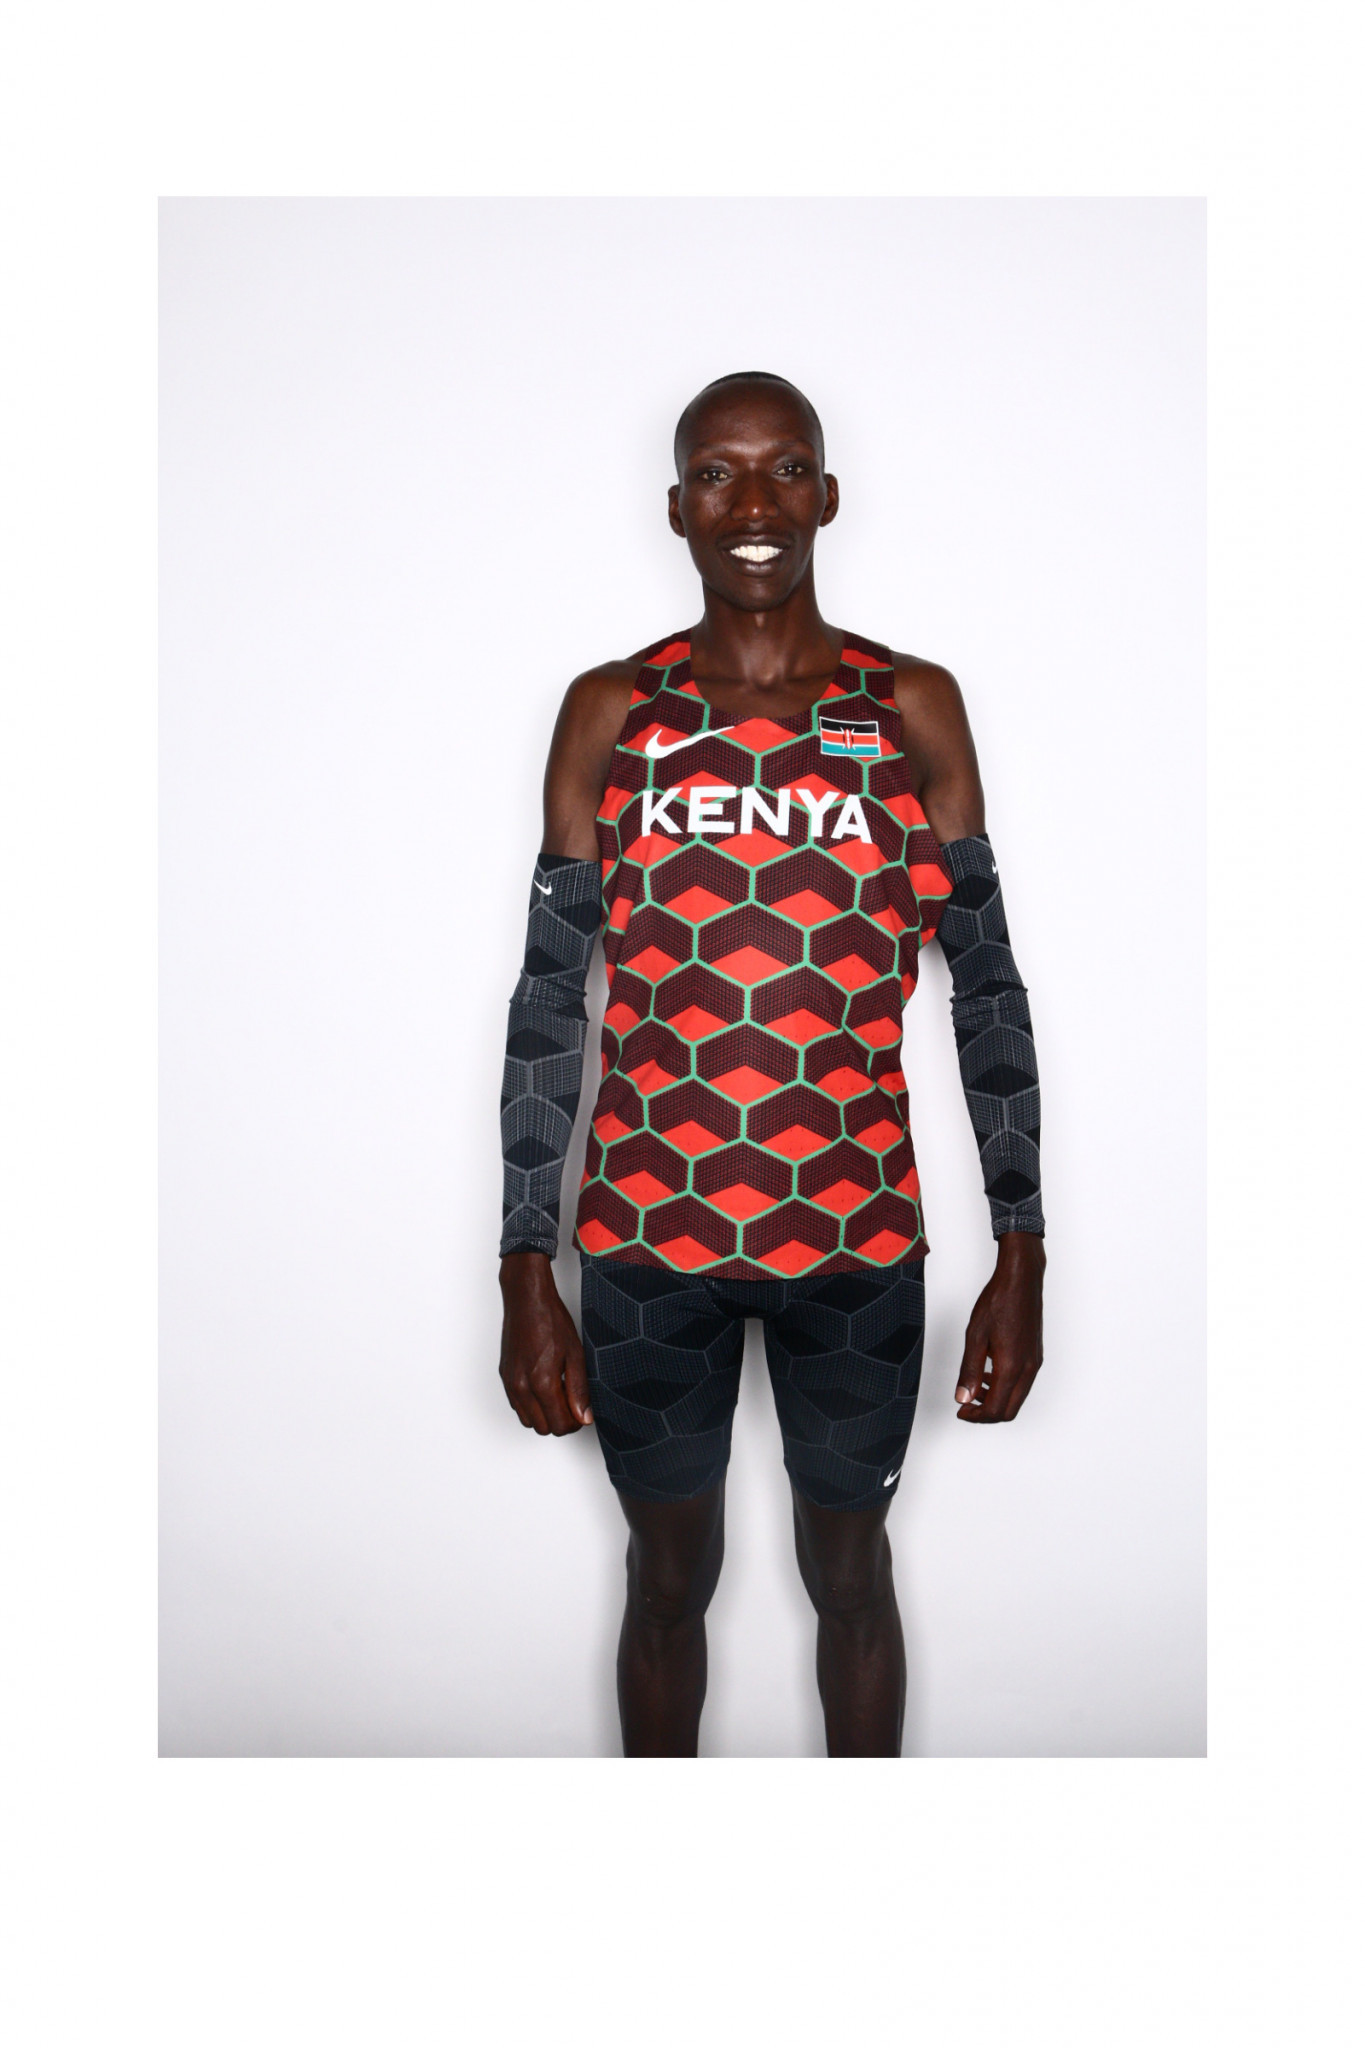 1500m runner Timothy Cheruiyot donning the controversial kit ©Mono Sports